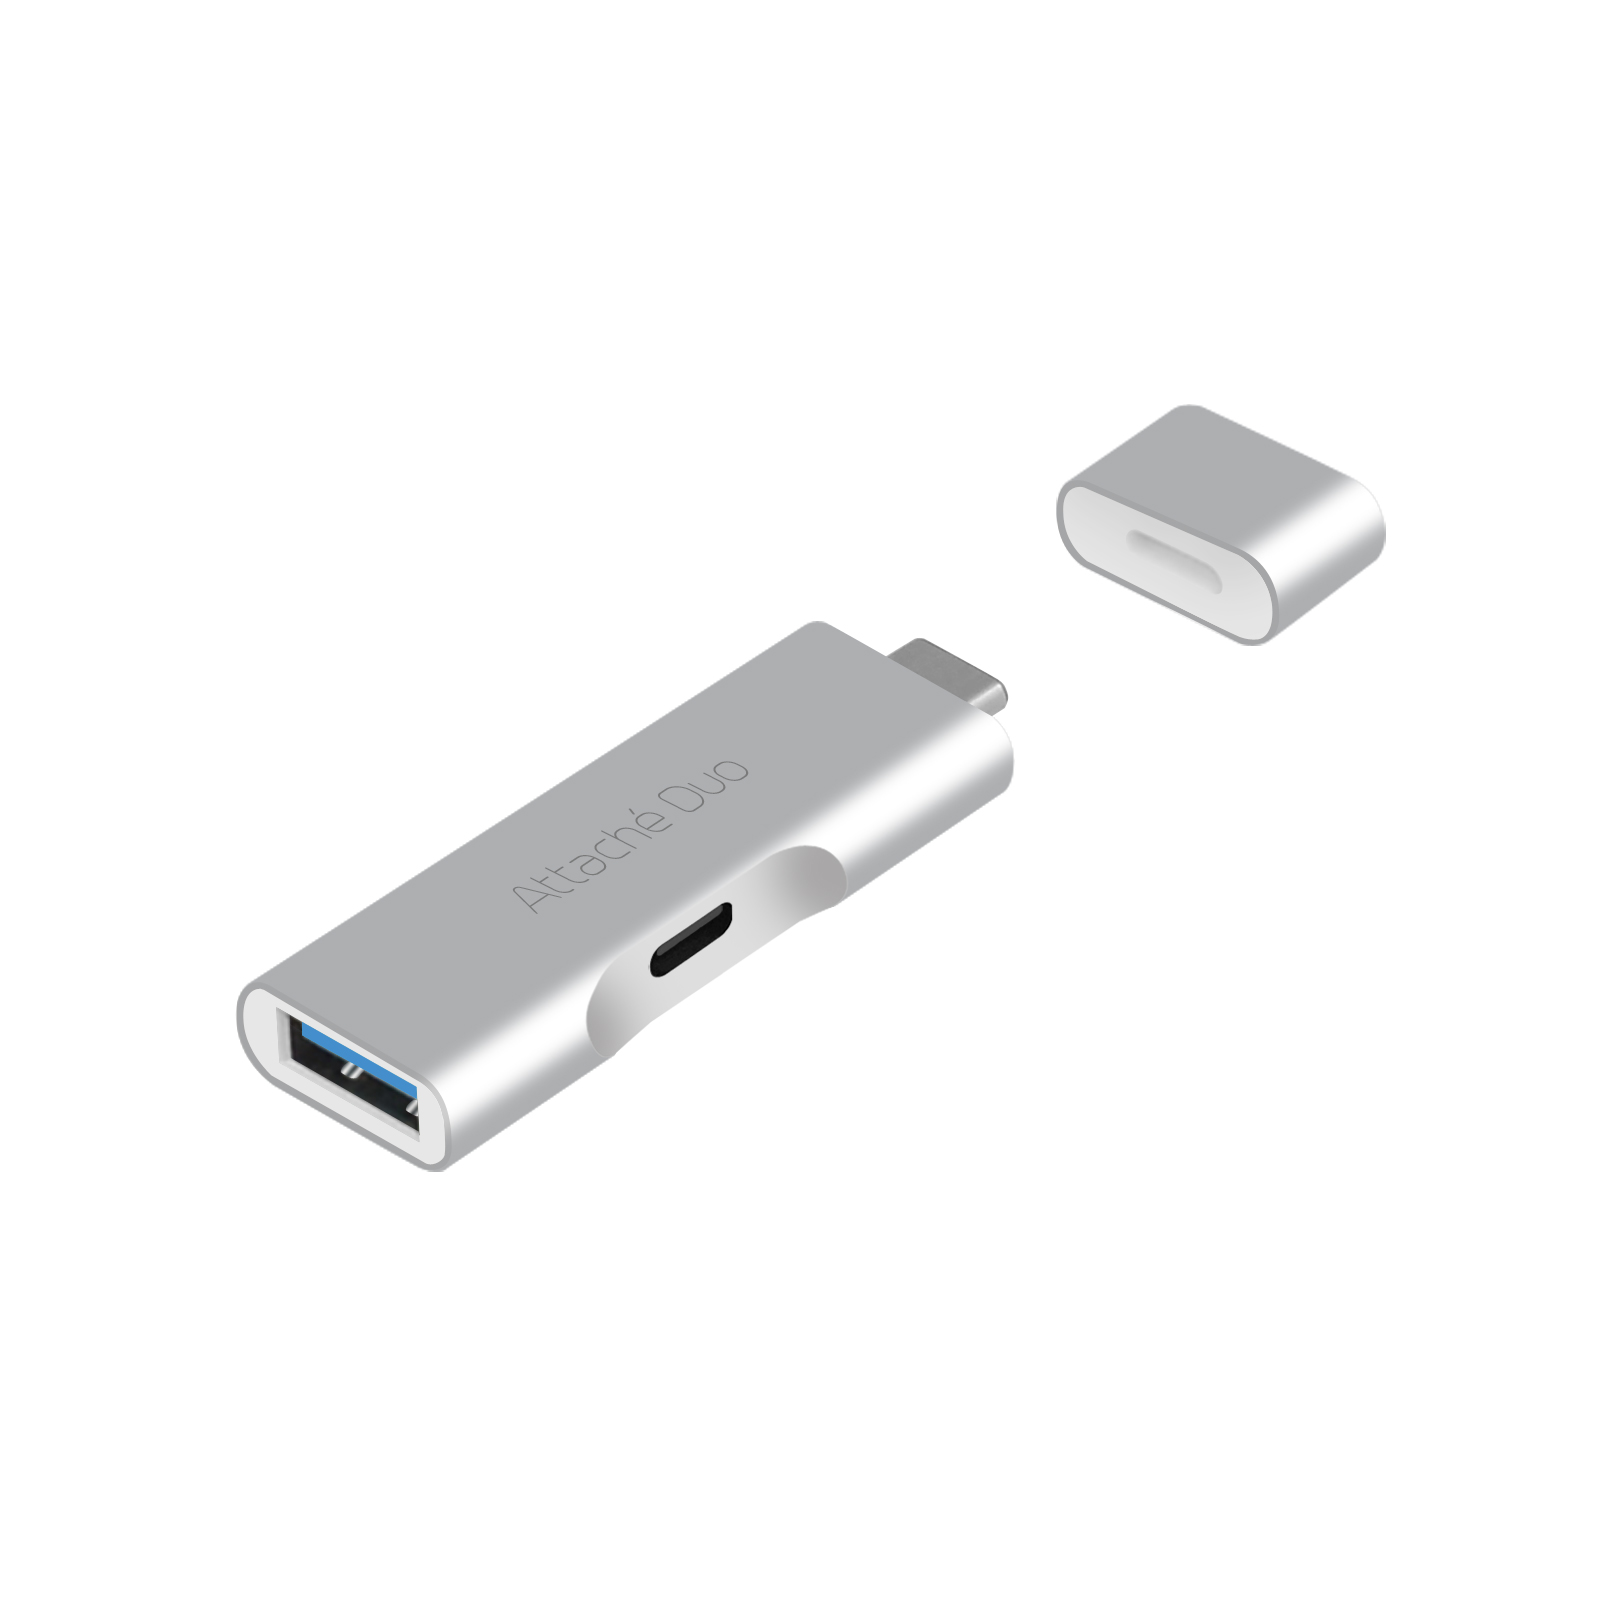 Adapters/MBEAT: mbeatÂ®, Attach, Duo, Type-C, To, USB, 3.1, Adapter, With, Type-C, USB-C, Port, -Support, USB, 3.1/3.0/2.0/1.1, devices, ï¼ˆLï¼‰, 